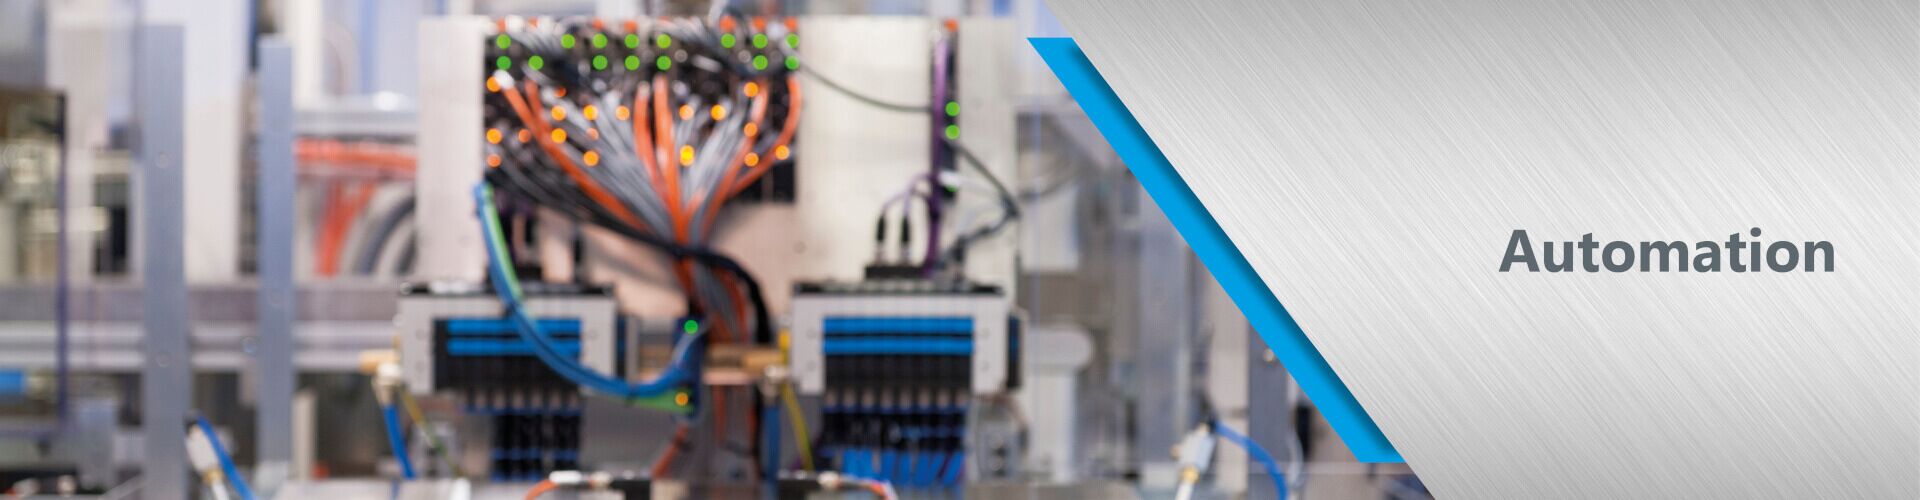 With over 20 years of experience in automation, we stand for economical and safe solutions.